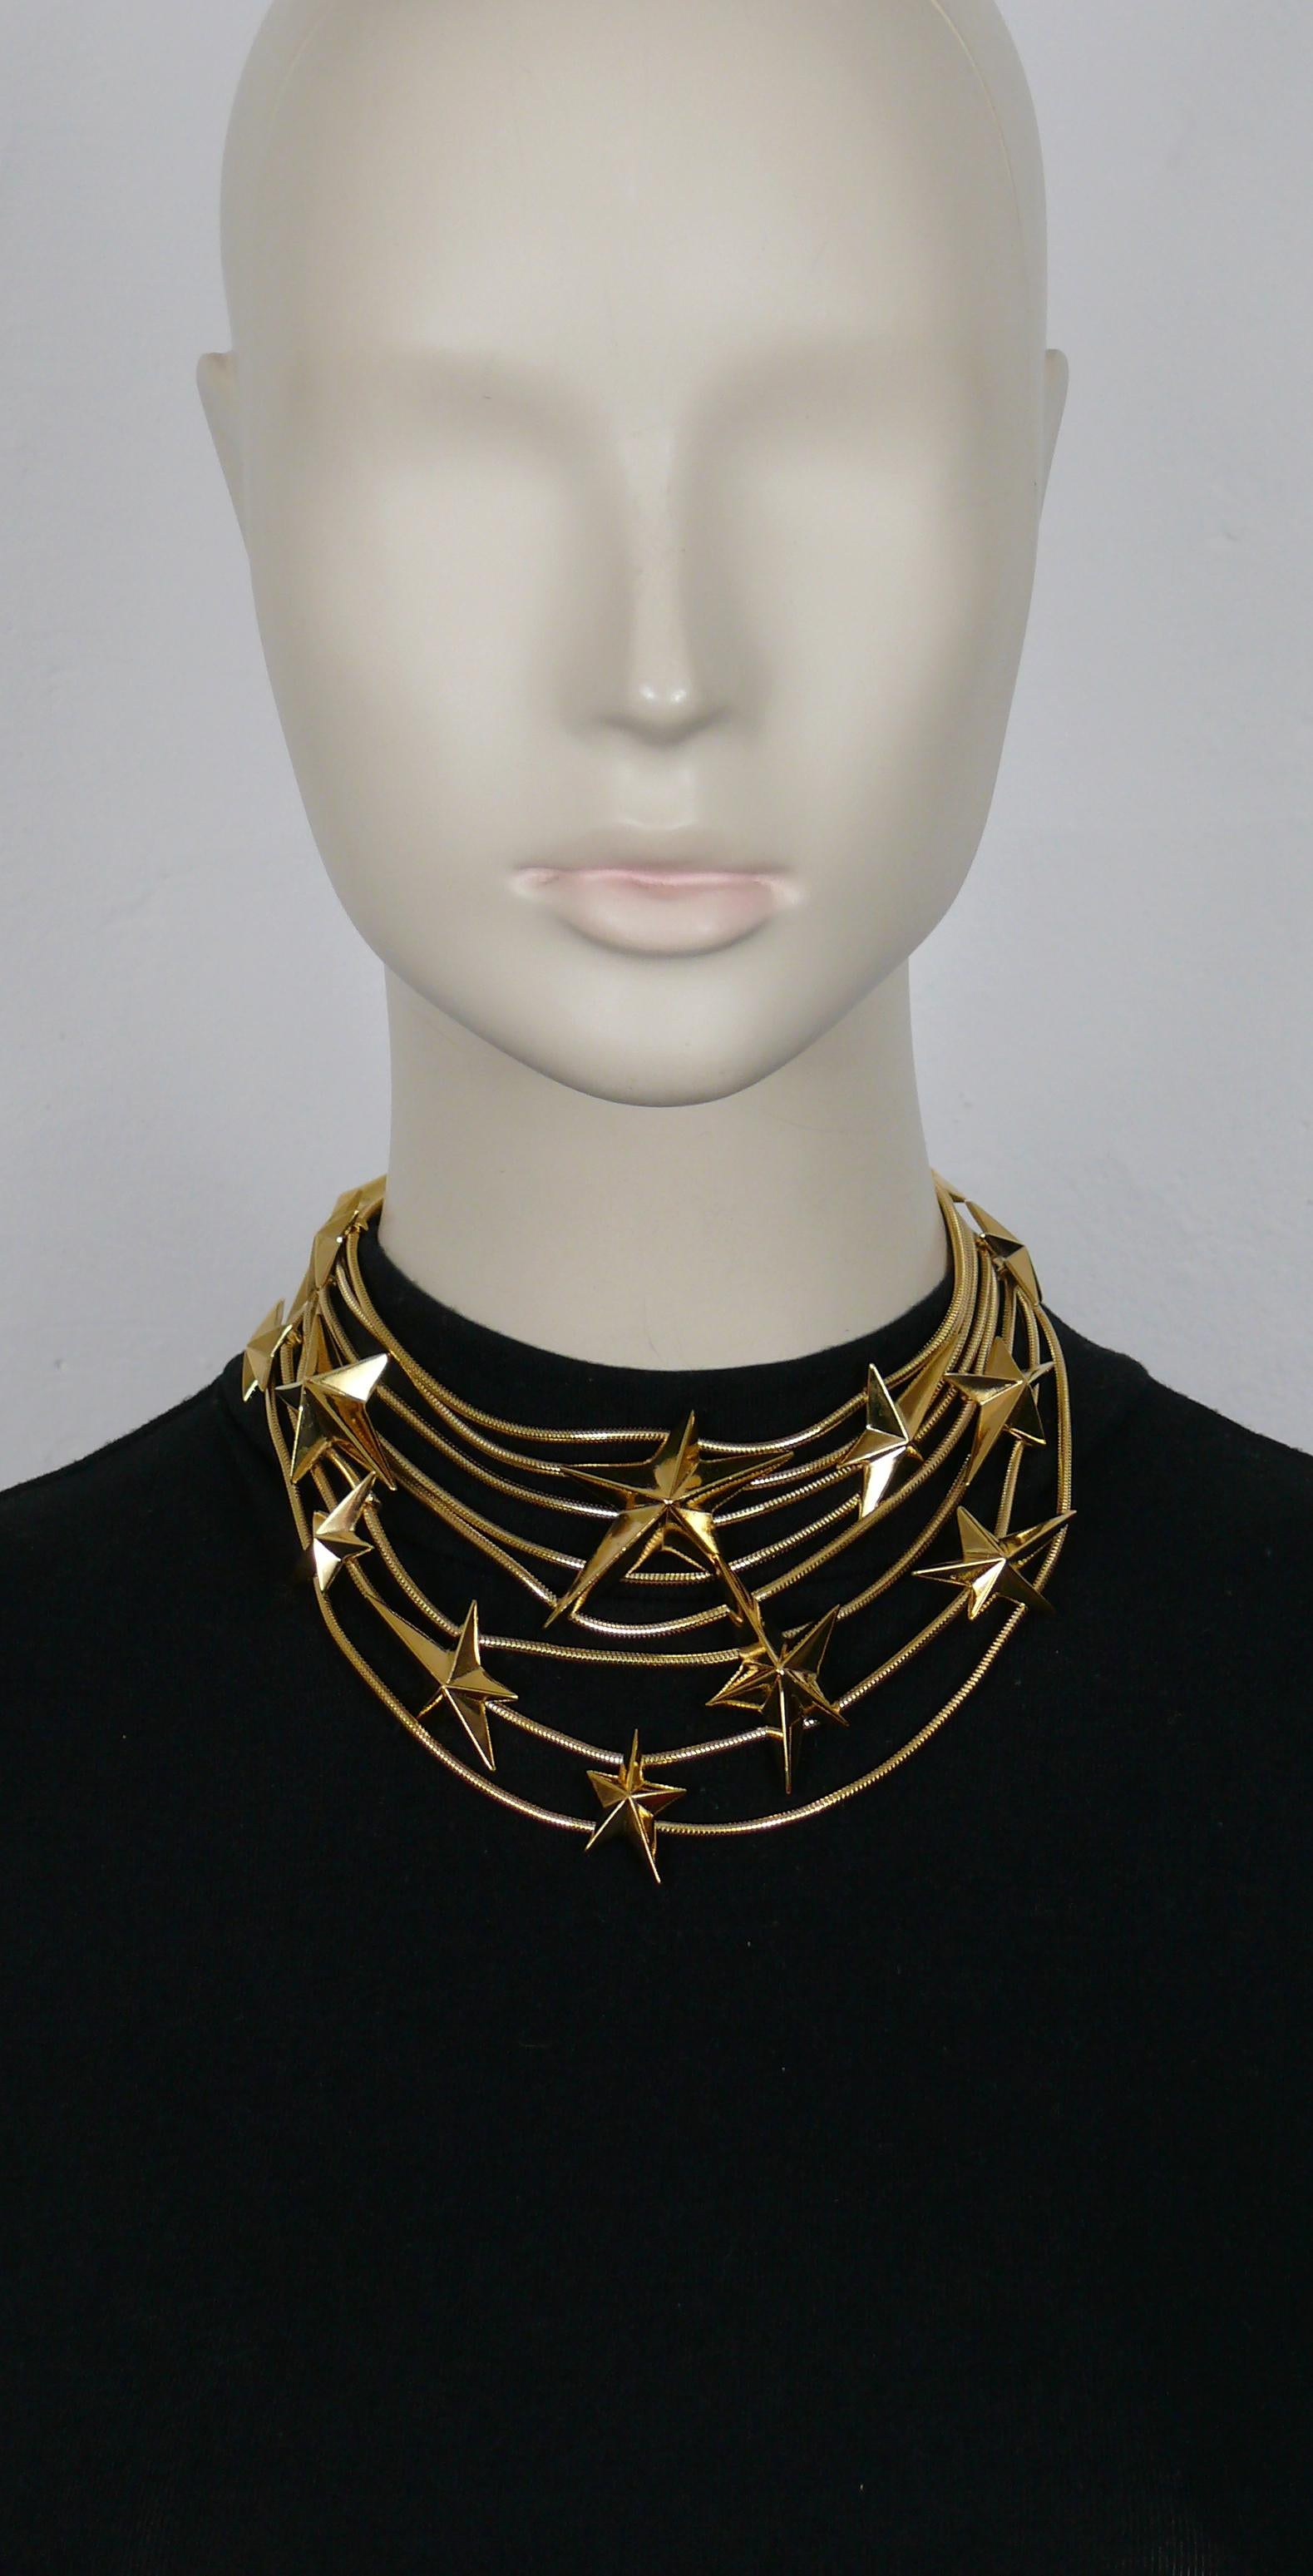 THIERRY MUGLER vintage rare gold tone multi strand snake chains choker necklace embellished with THIERRY MUGLER's iconic stars.

From a French private collection.

Adjustable T-bar and toggle closure.

Embossed THIERRY MUGLER and TM.

Indicative